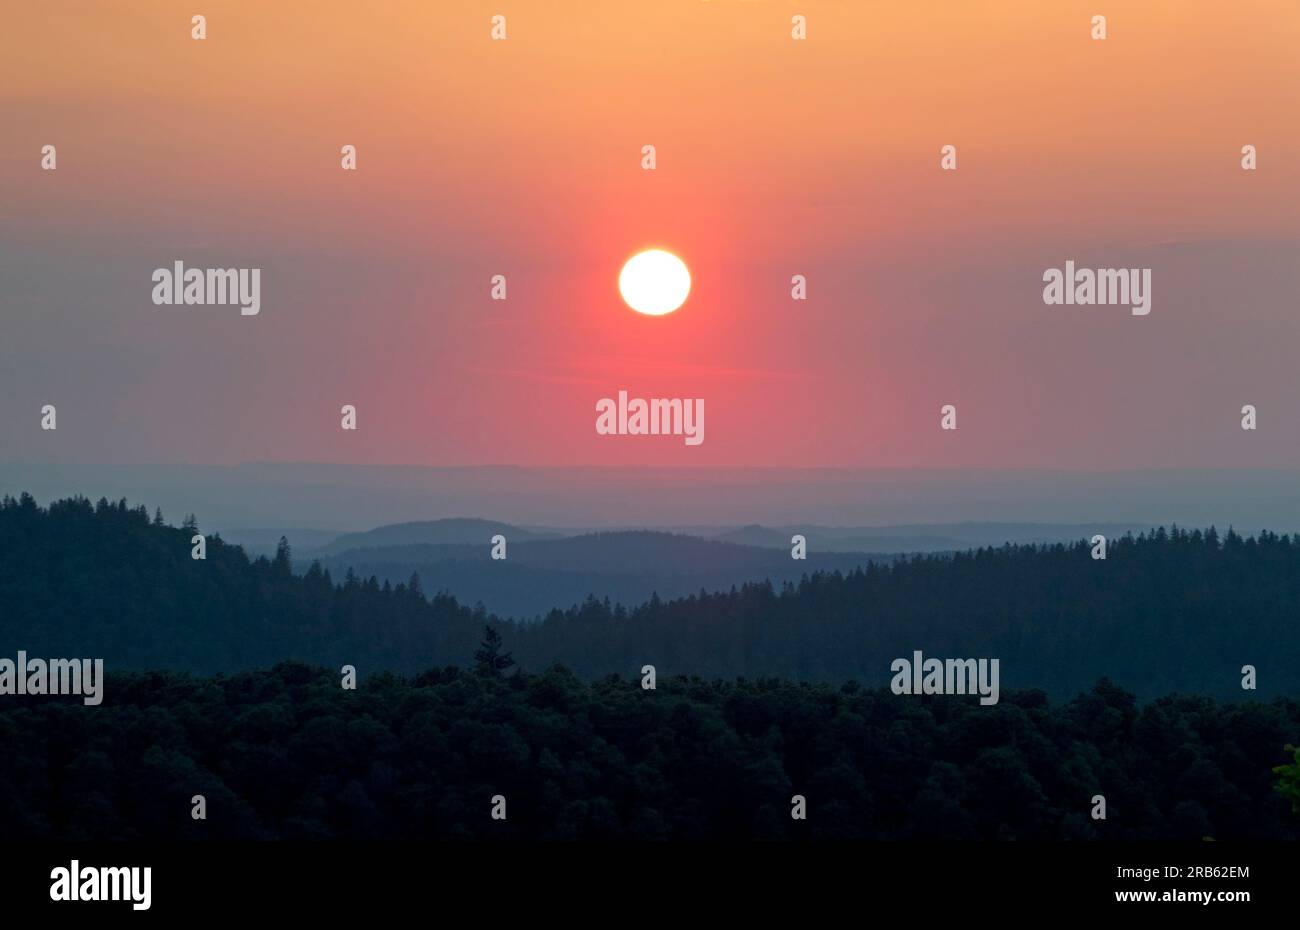 Sunset over de hills of the Vosges, an orange colored sun in the evening sky, hill ranges fading in the distance Stock Photo